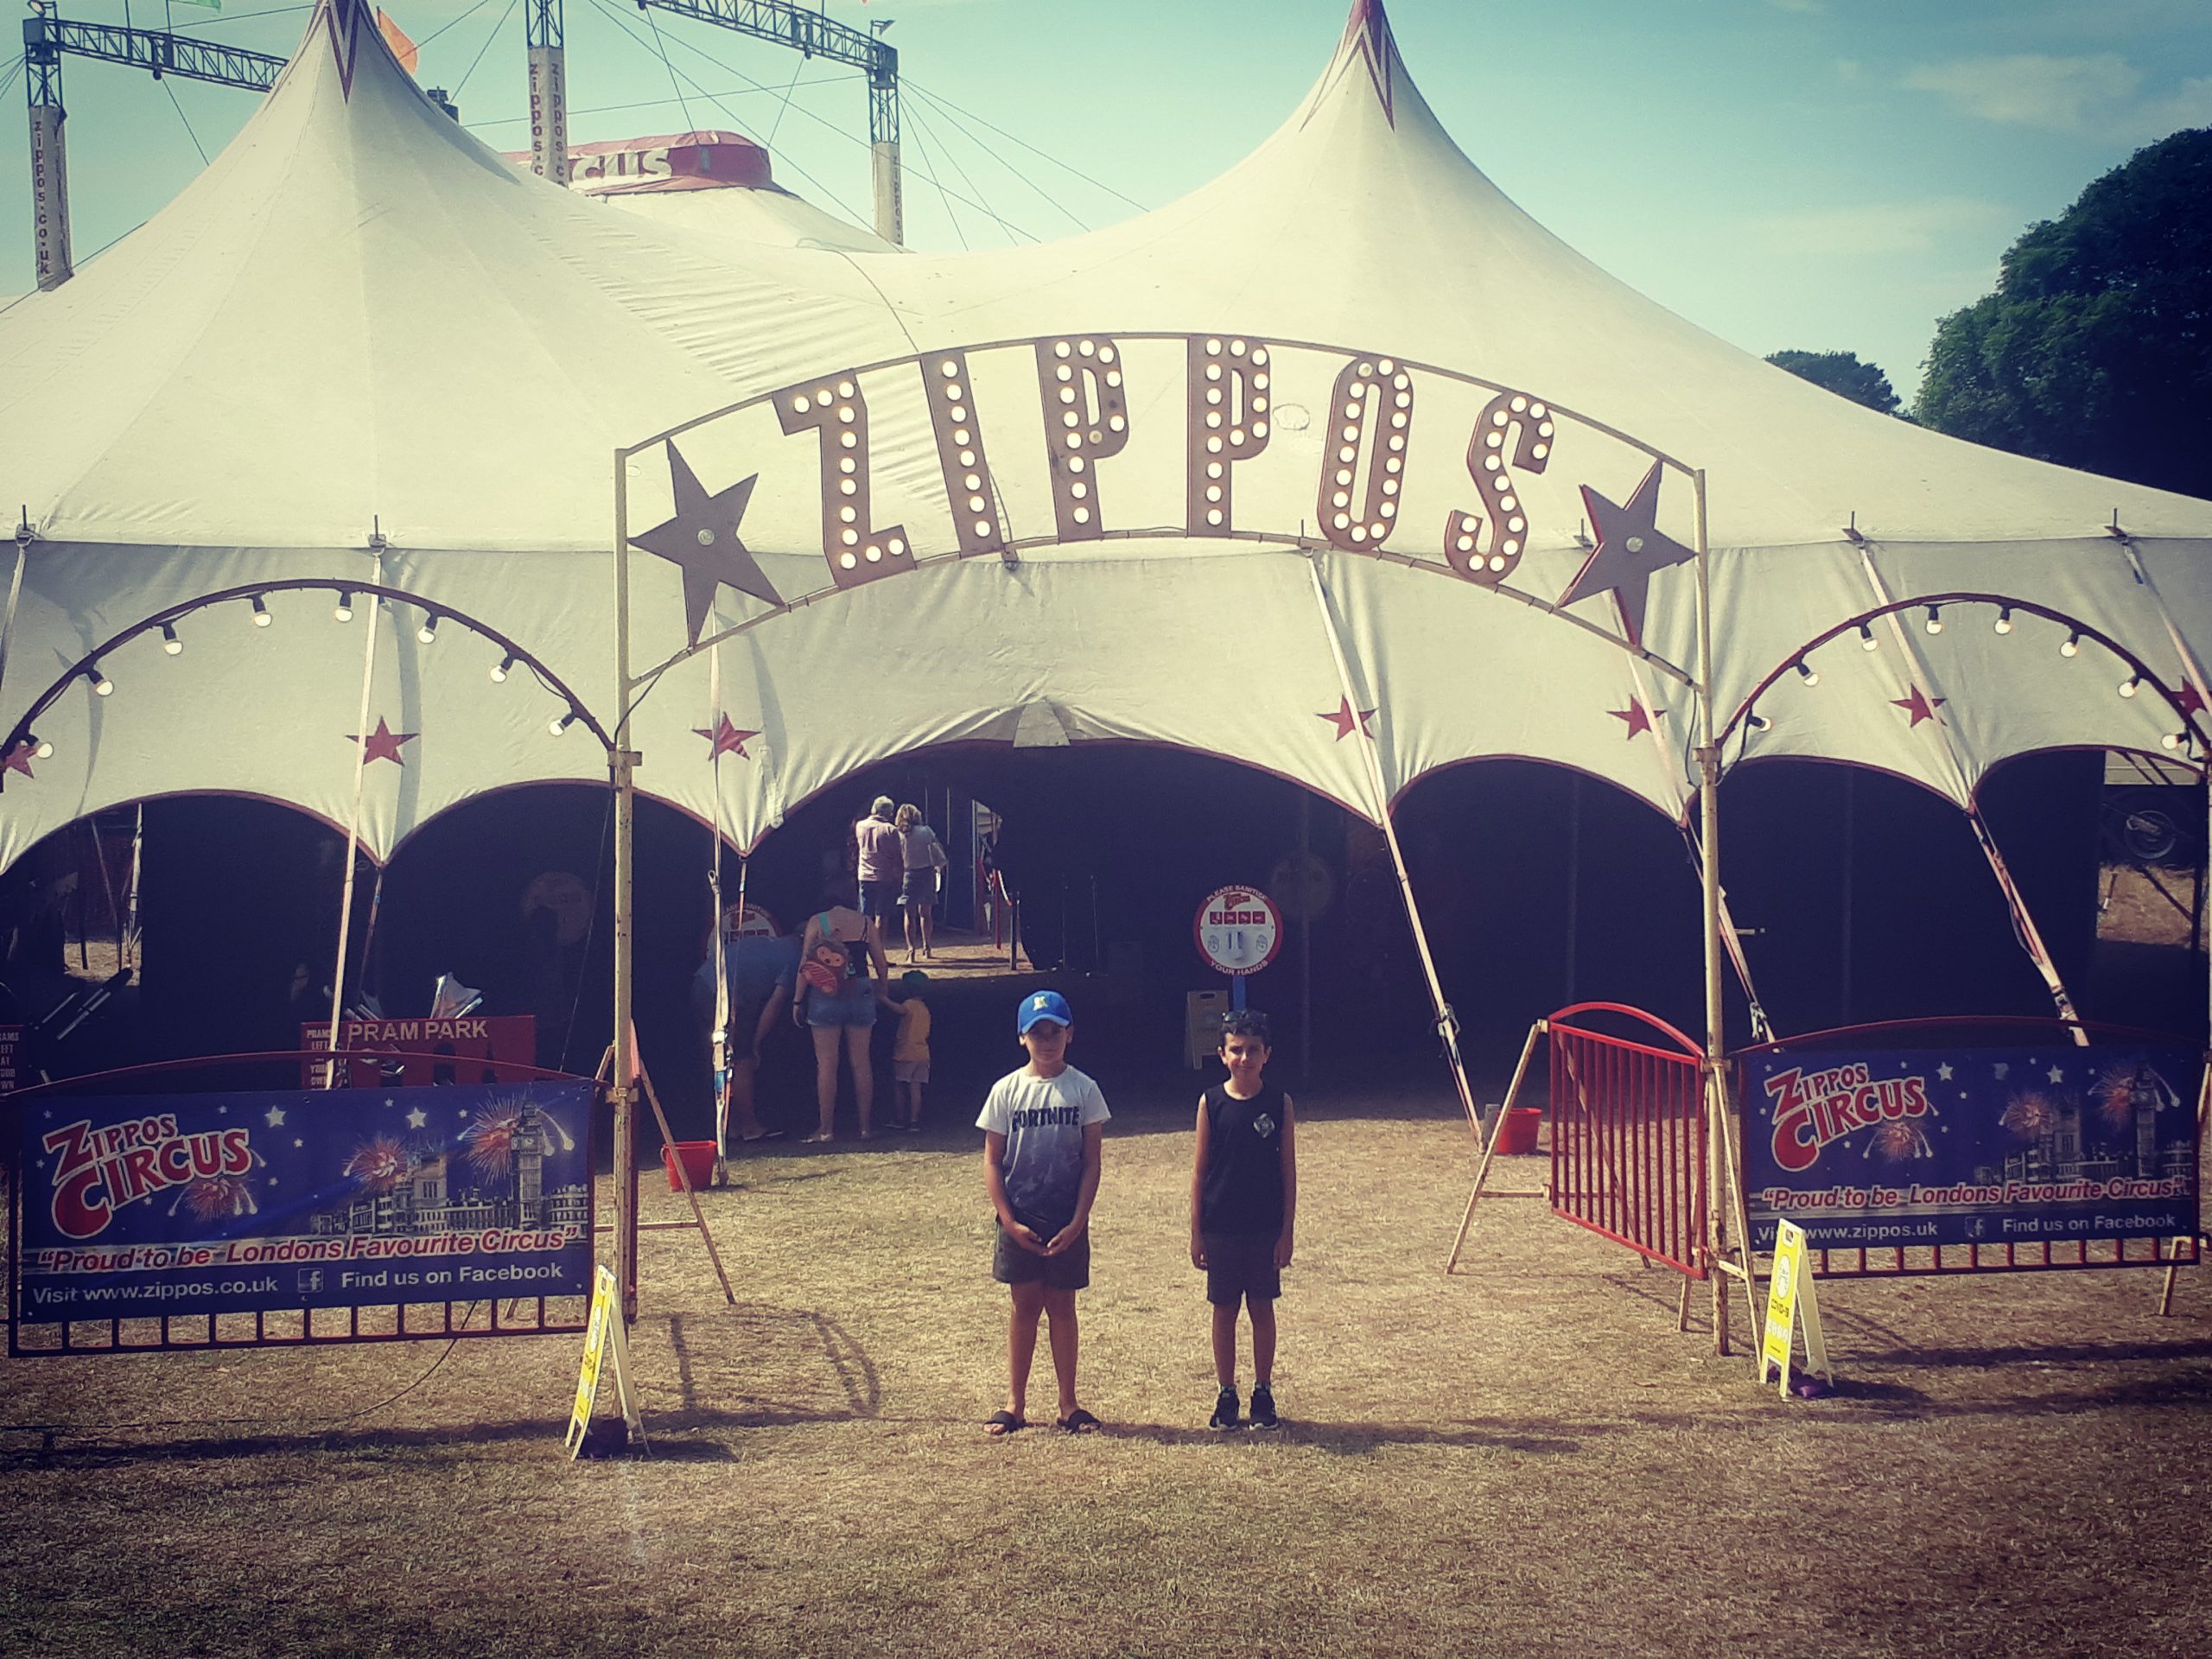 Zippos Circus Entrance with the kids